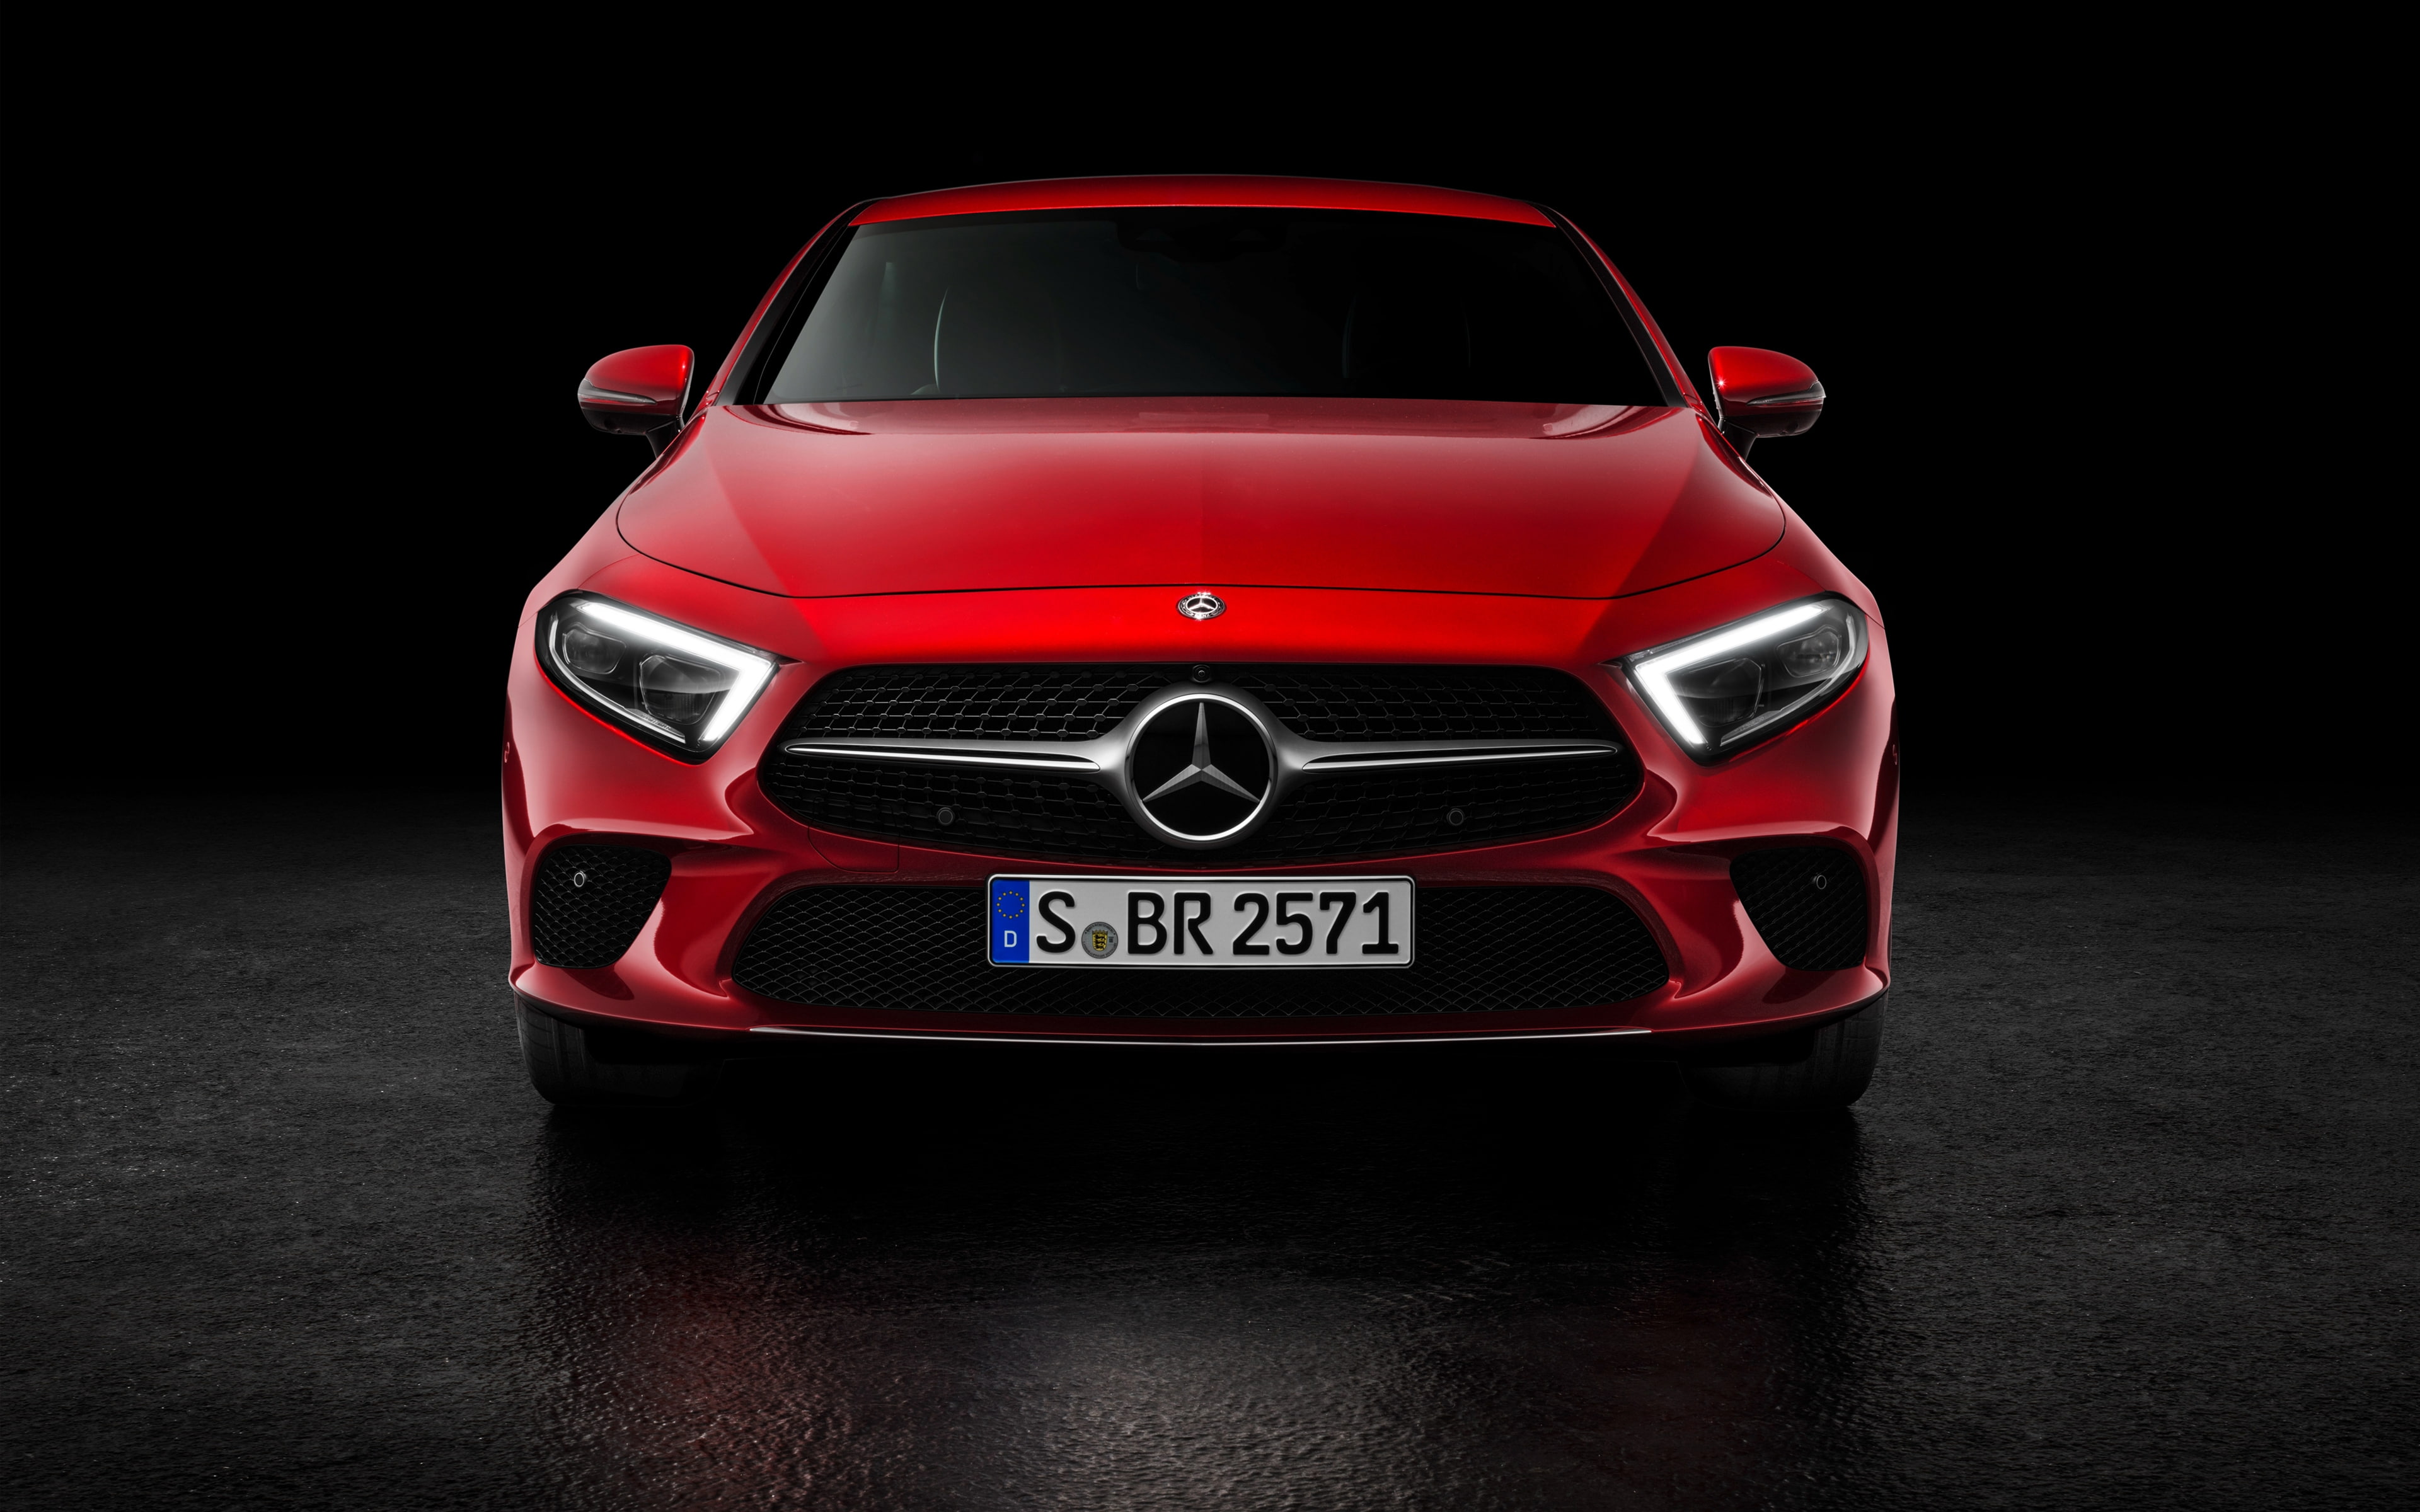 mercedes benz cls 450, red, front view, luxury, cars, Vehicle